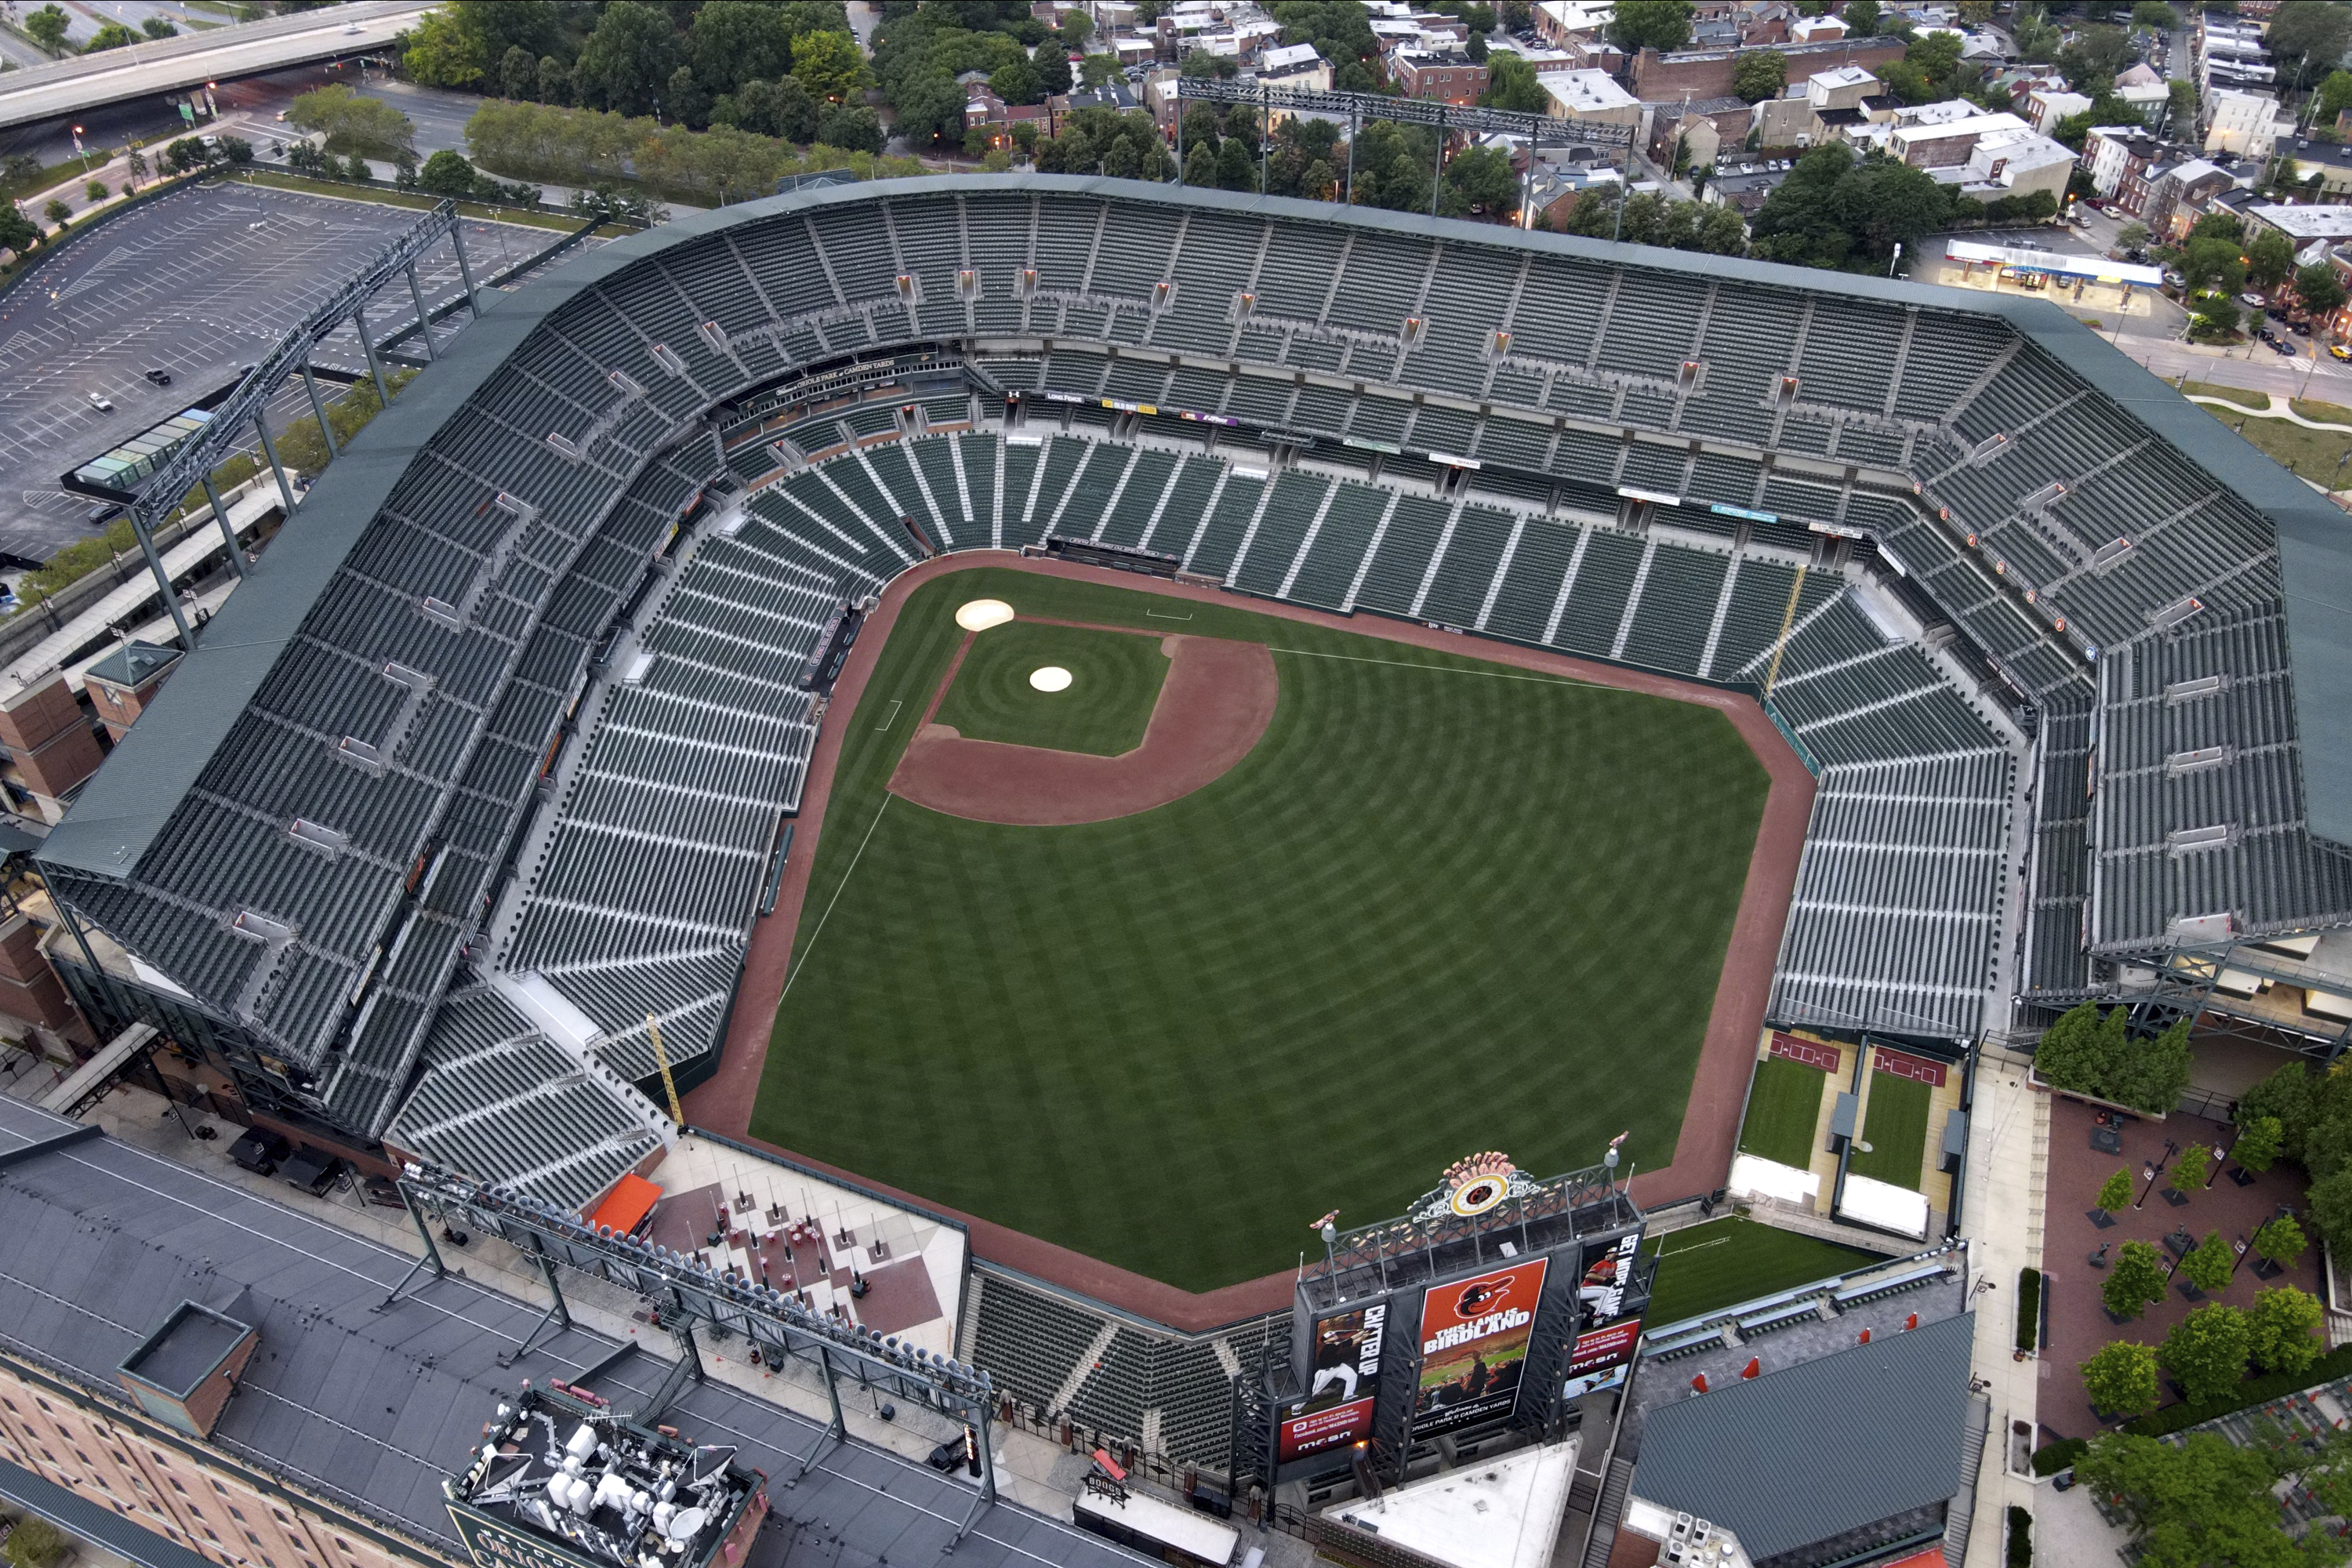 Gov, O's: We want to revitalize Camden Yards - Ballpark Digest